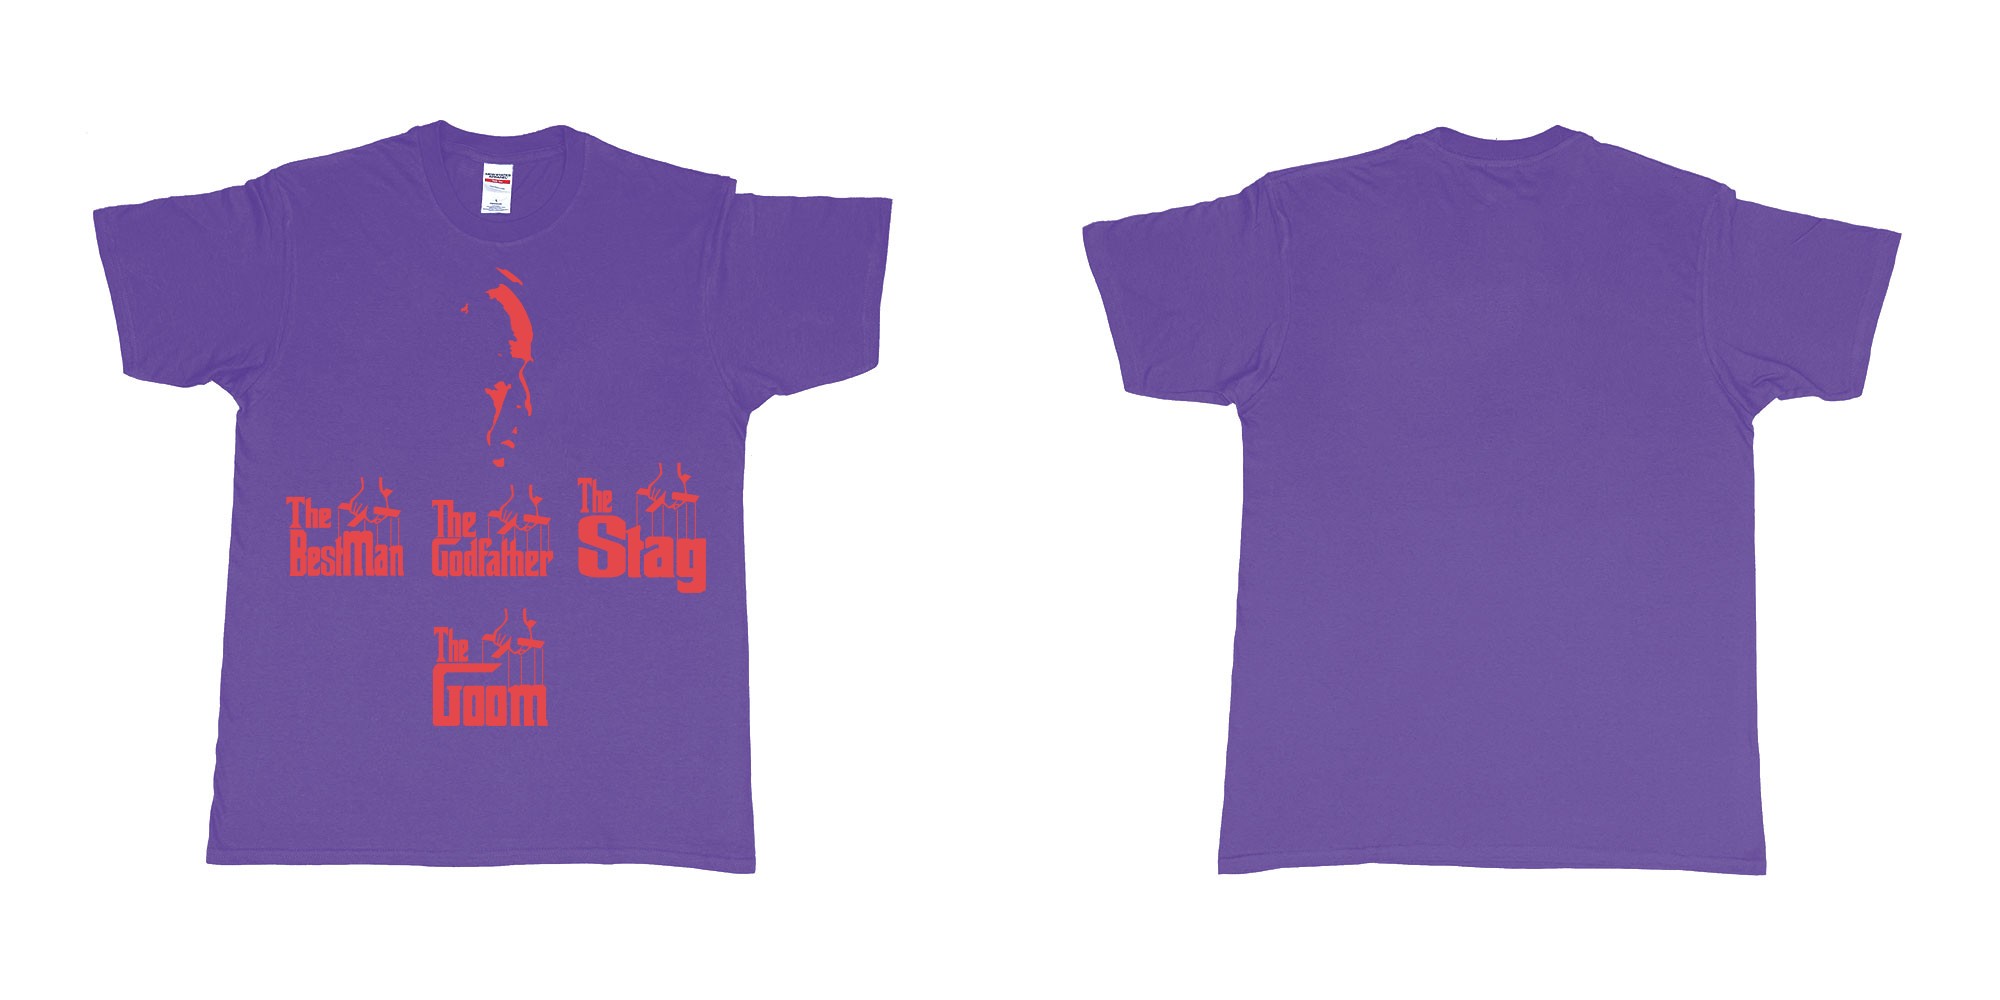 Custom tshirt design TPW the godfather in fabric color purple choice your own text made in Bali by The Pirate Way